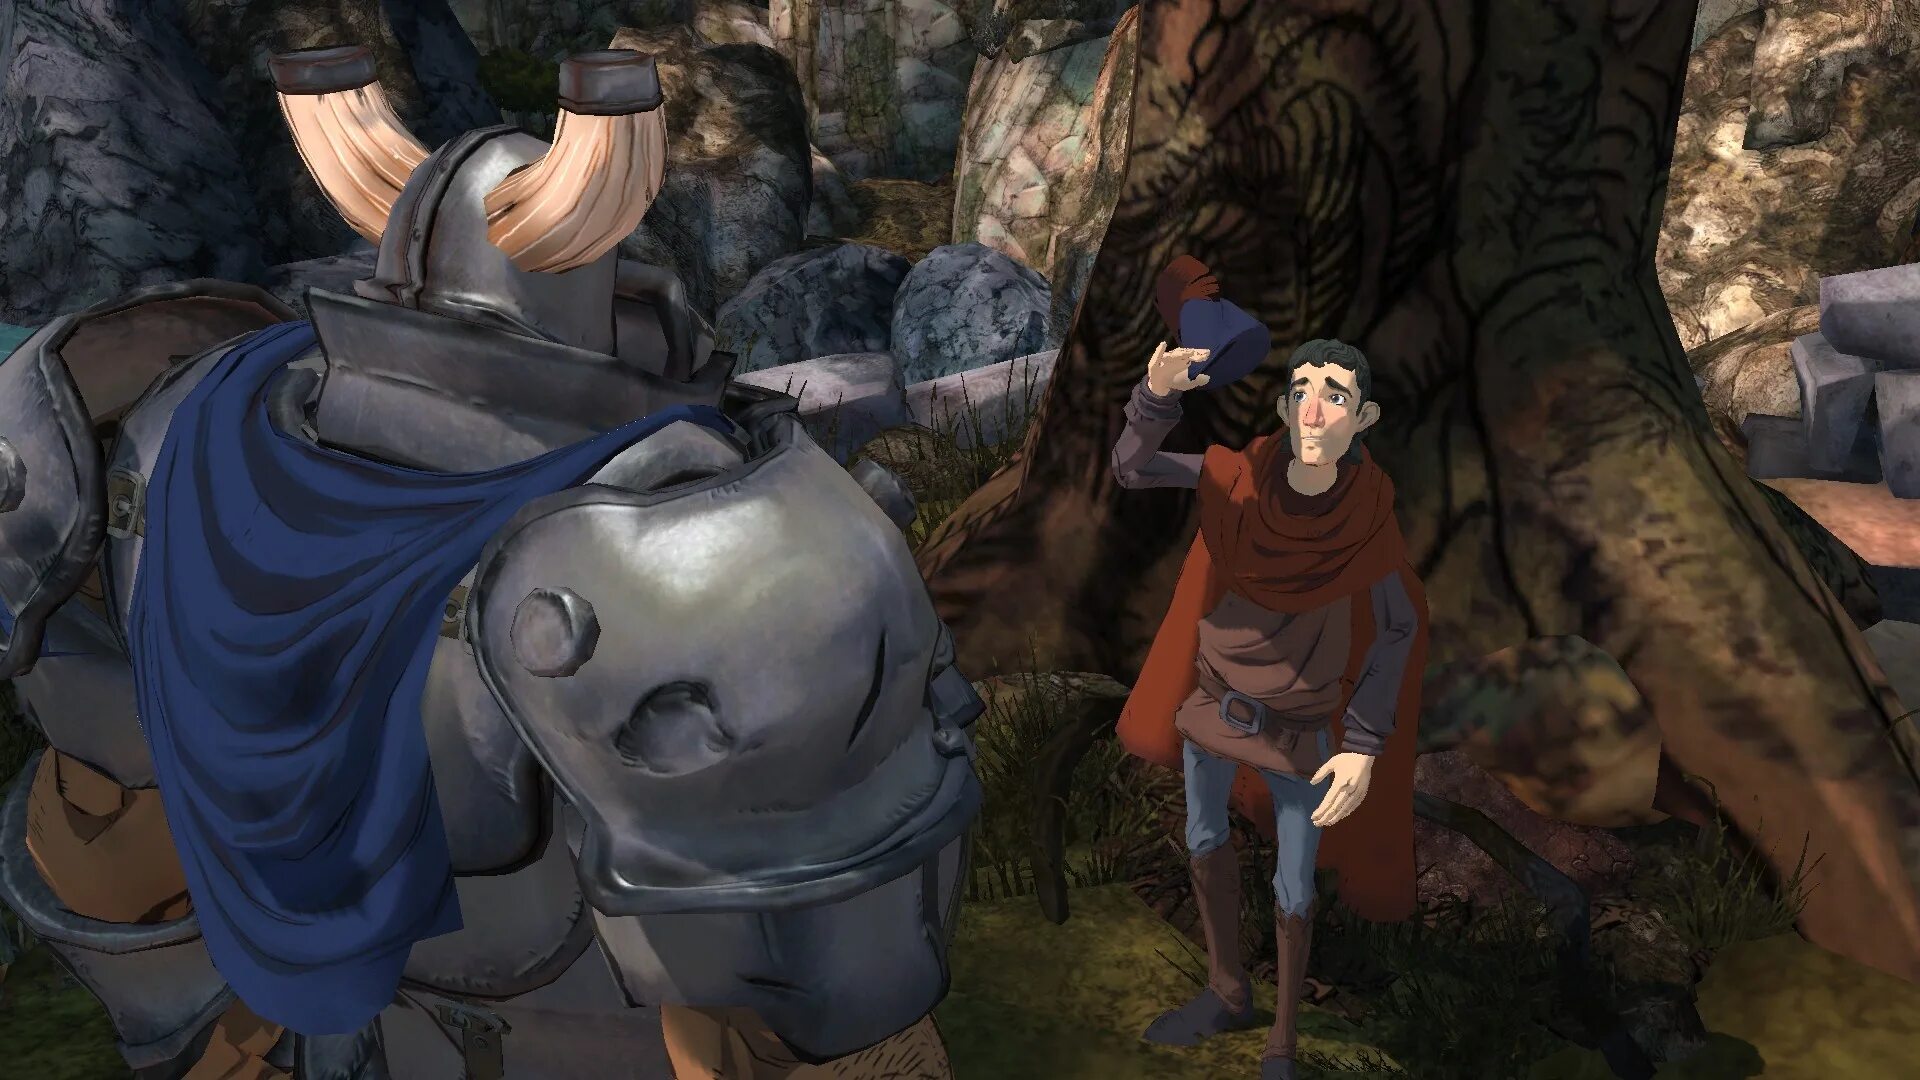 Kings Quest ps3. King s Quest 2015. Kings Quest Xbox 360. King's Quest 3. Включи квест 3